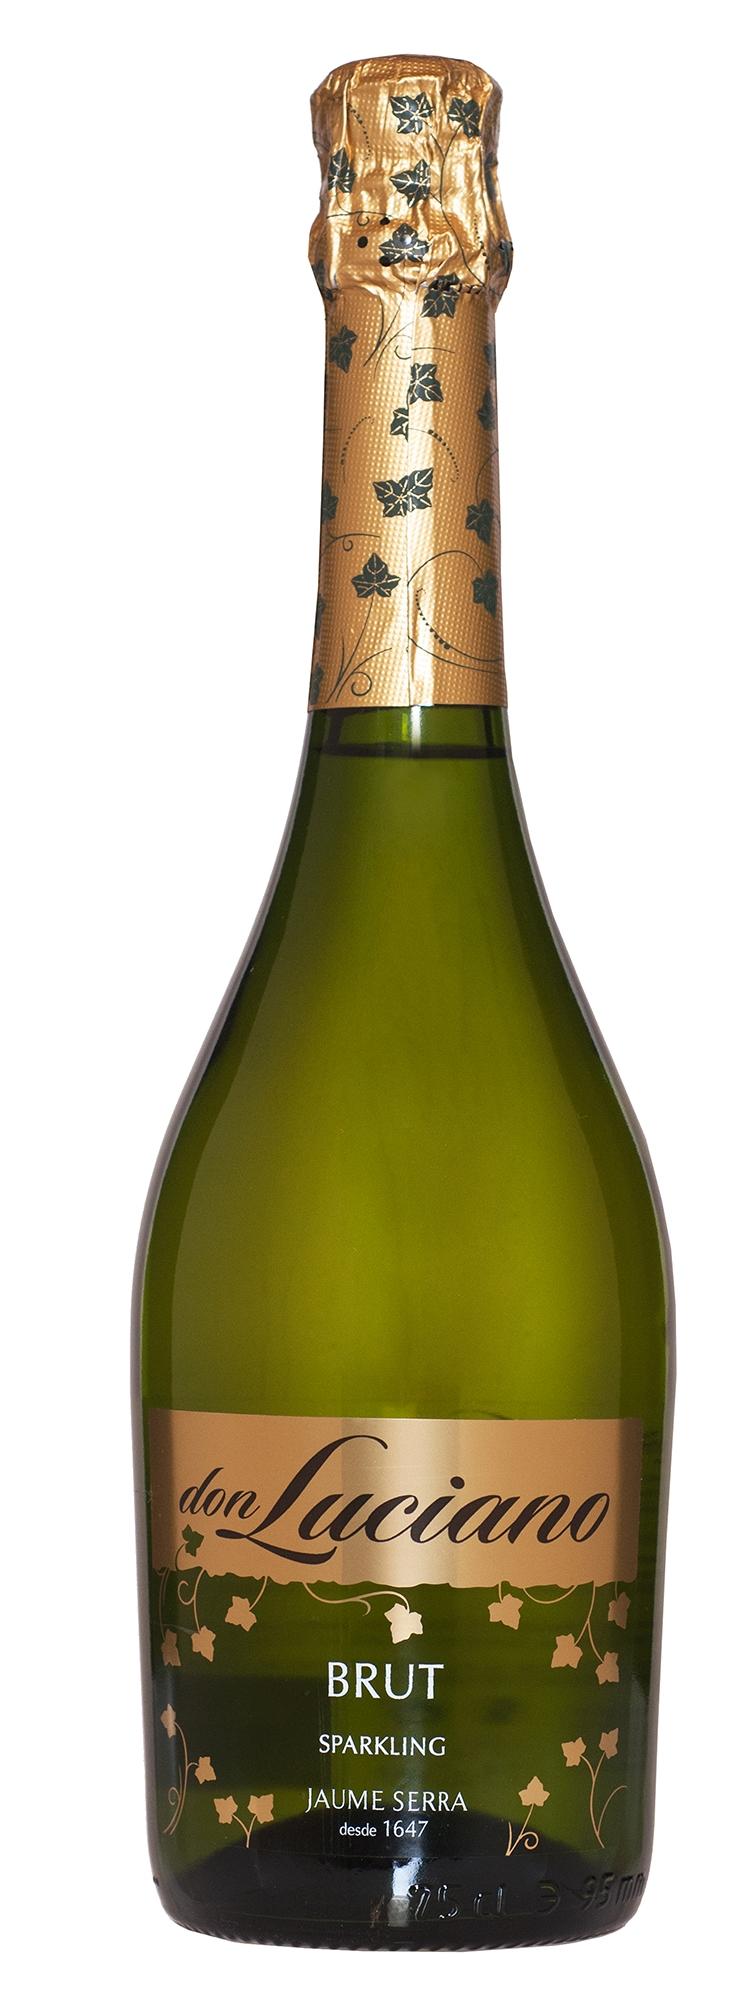 DON LUCIANO BRUT 75CL